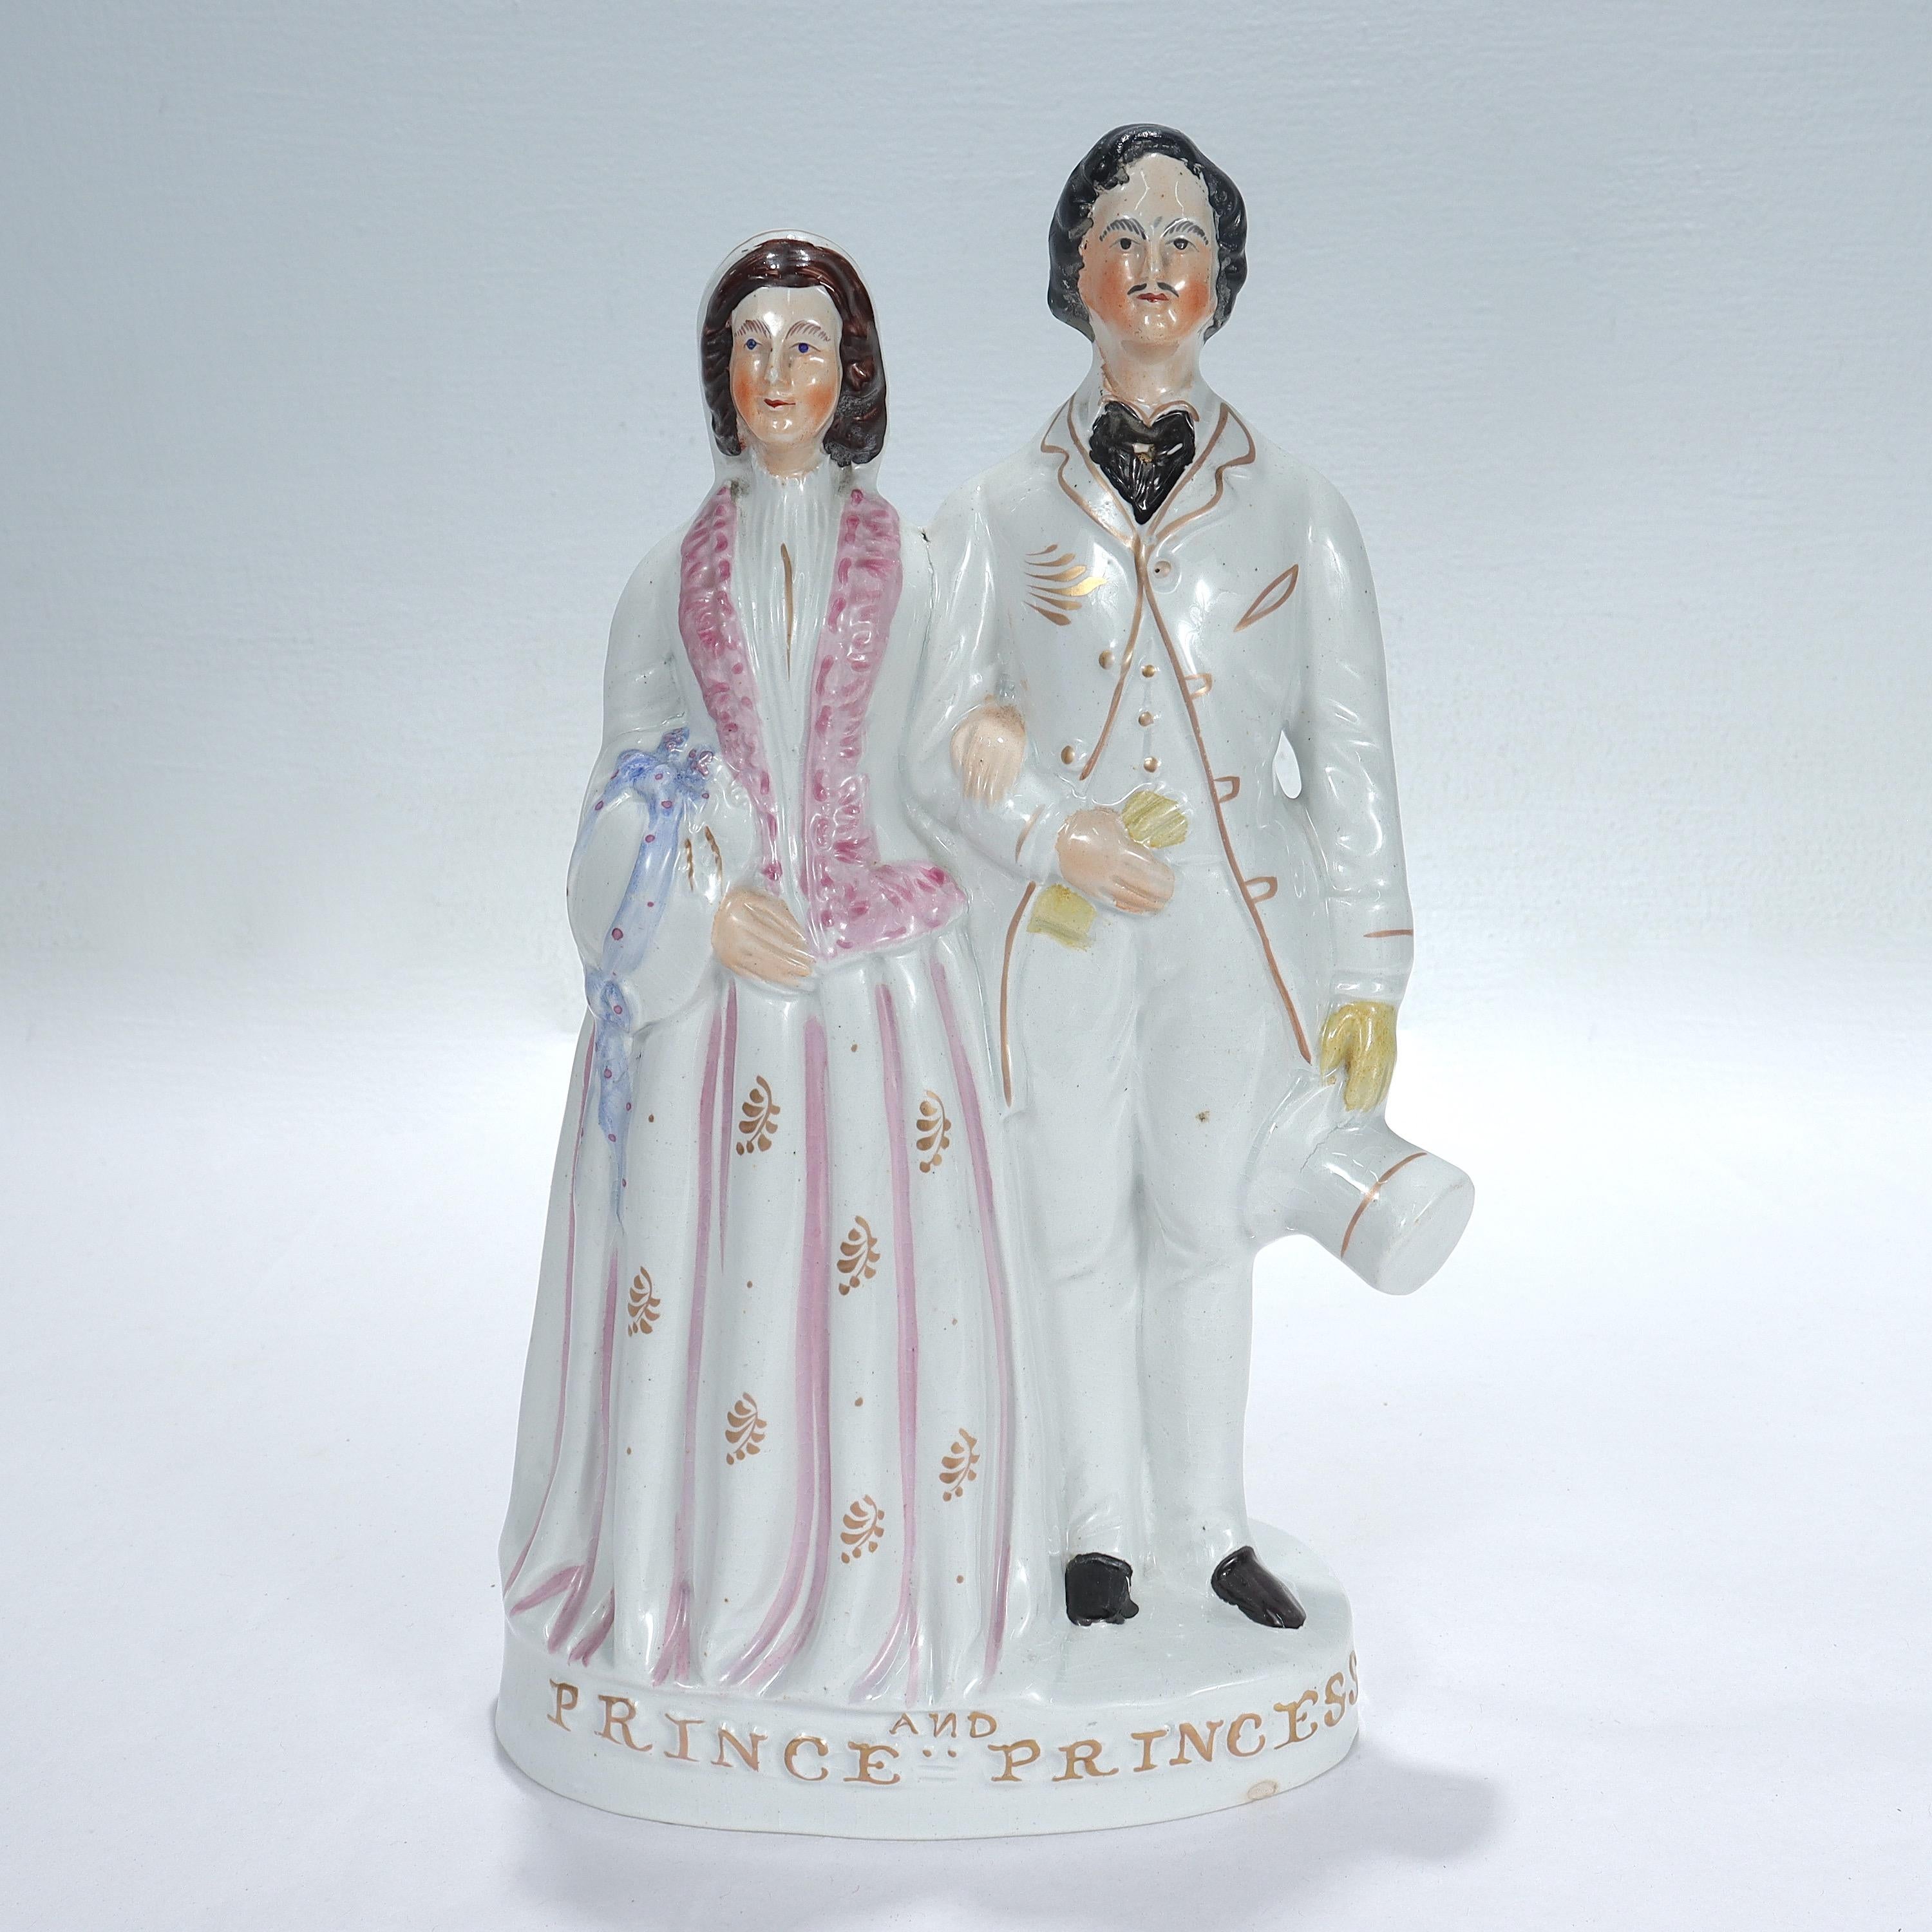 A fine antique Staffordshire pottery figurine.

Depicting Princess Alexandra of Denmark and Albert Edward, the Prince of Wales.

The two were married in 1863.

The royal figures stand atop a plinth that reads 